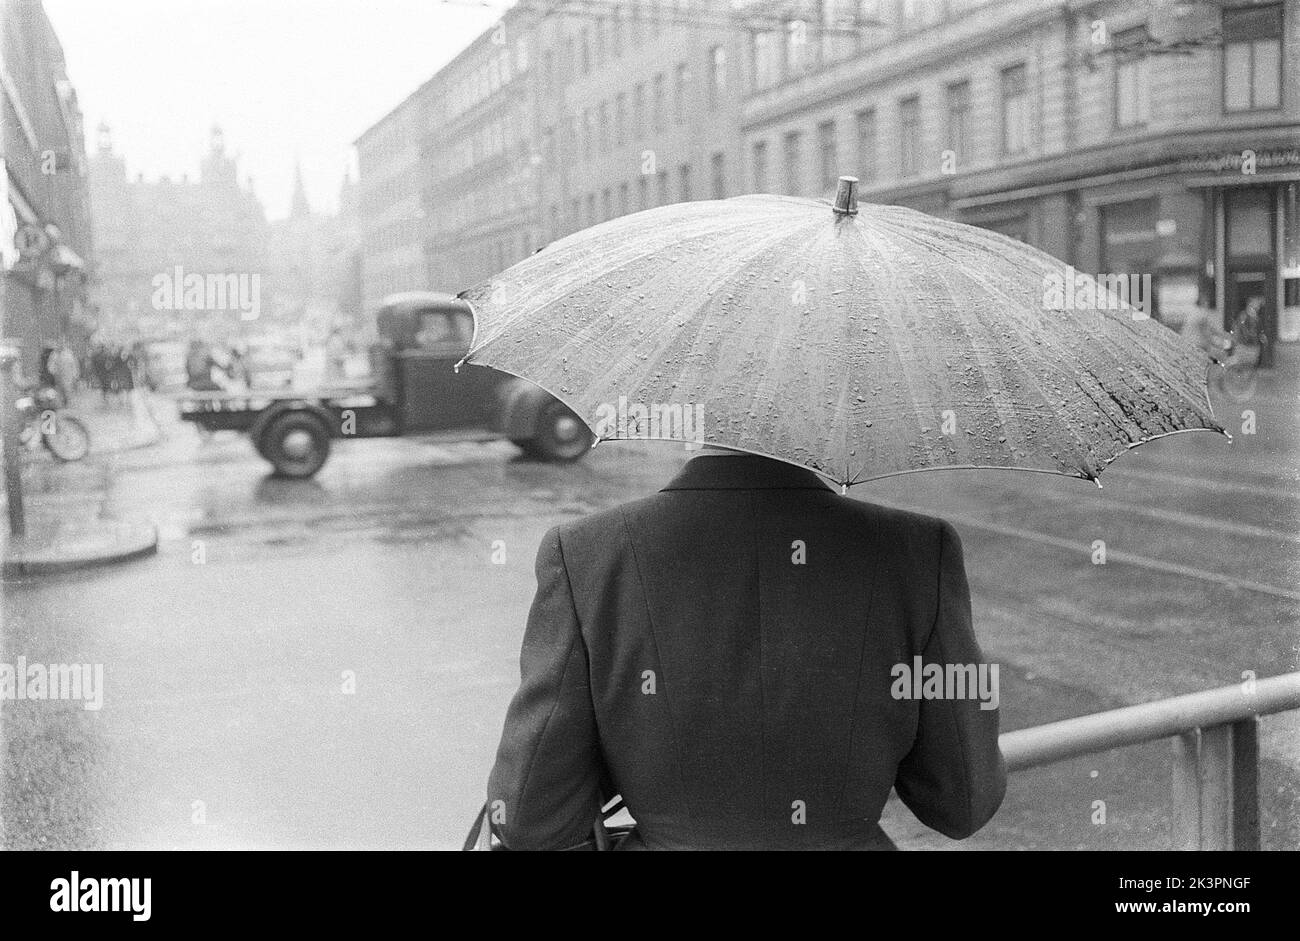 Umbrellas in the 1950s. The rain is pouring and a woman is seen holding an umbrella over herself. It's a rainy day in Stockholm Sweden 1953. ref 2A-1 Stock Photo